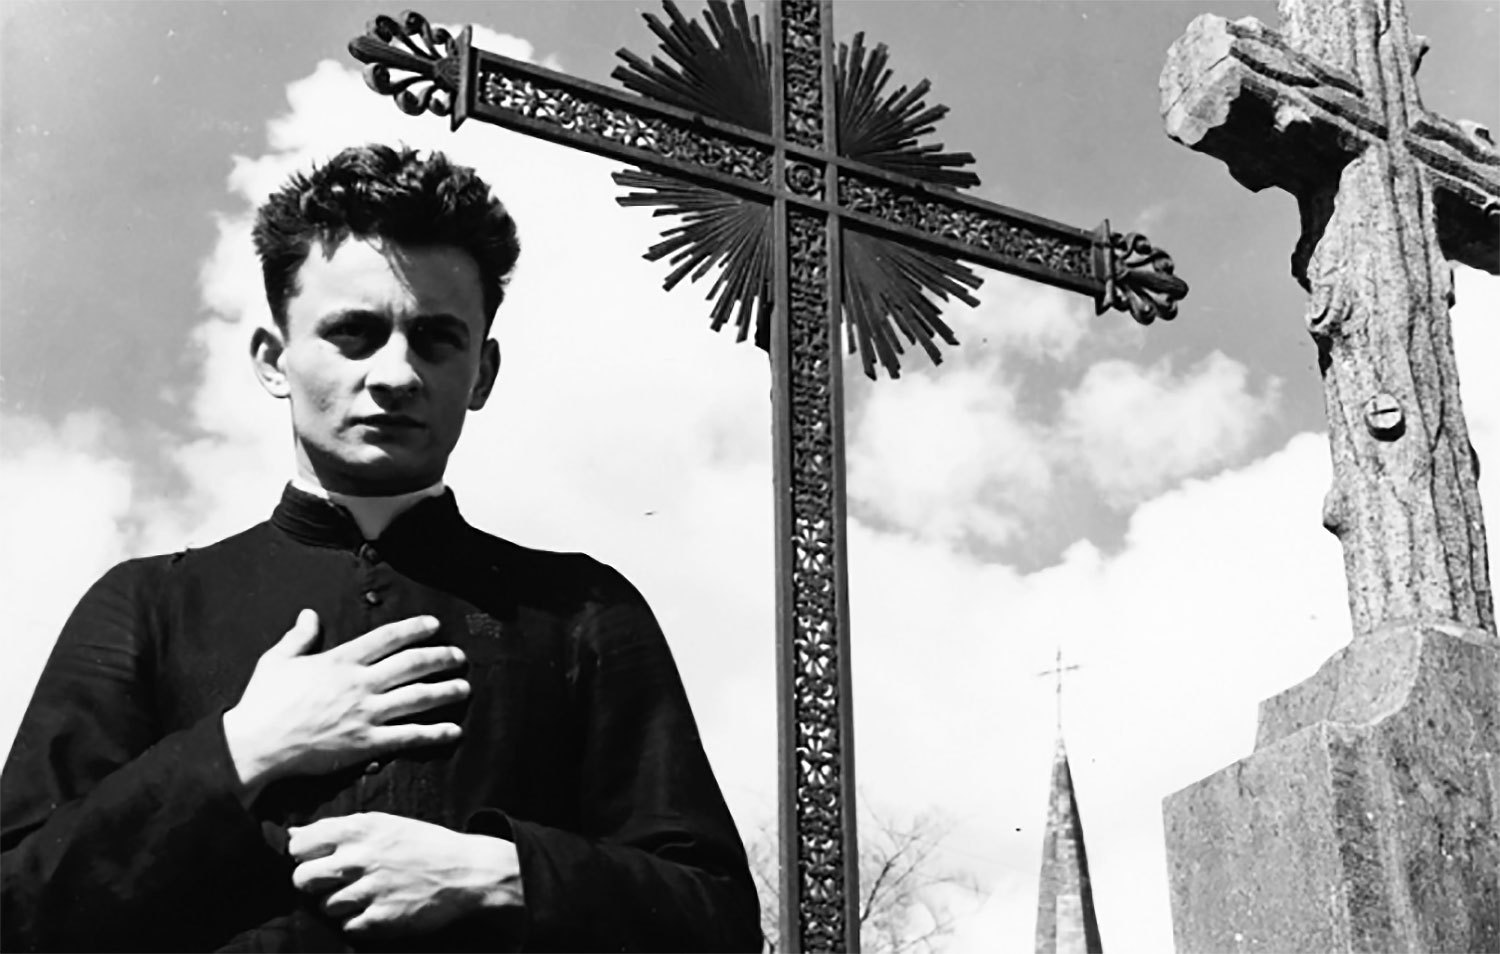 Still of priest standing in front of outdoor cross in Robert Bresson's 1951 film Diary of a Country Priest